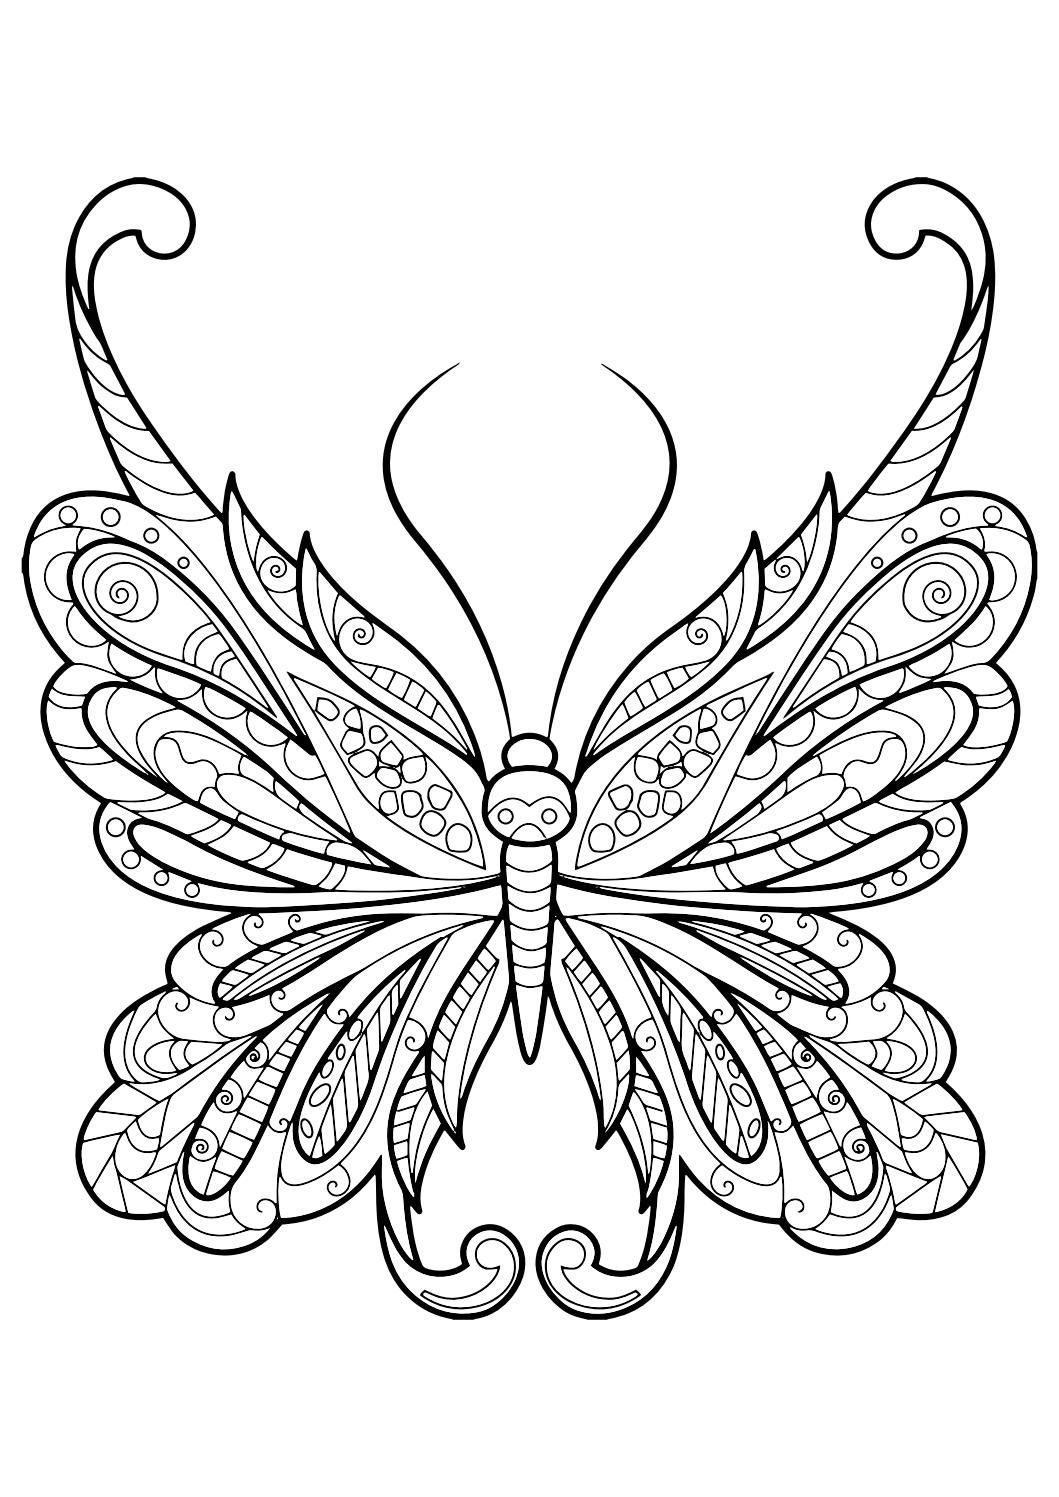 Butterfly Coloring Pages for Adults   Best Coloring Pages For Kids